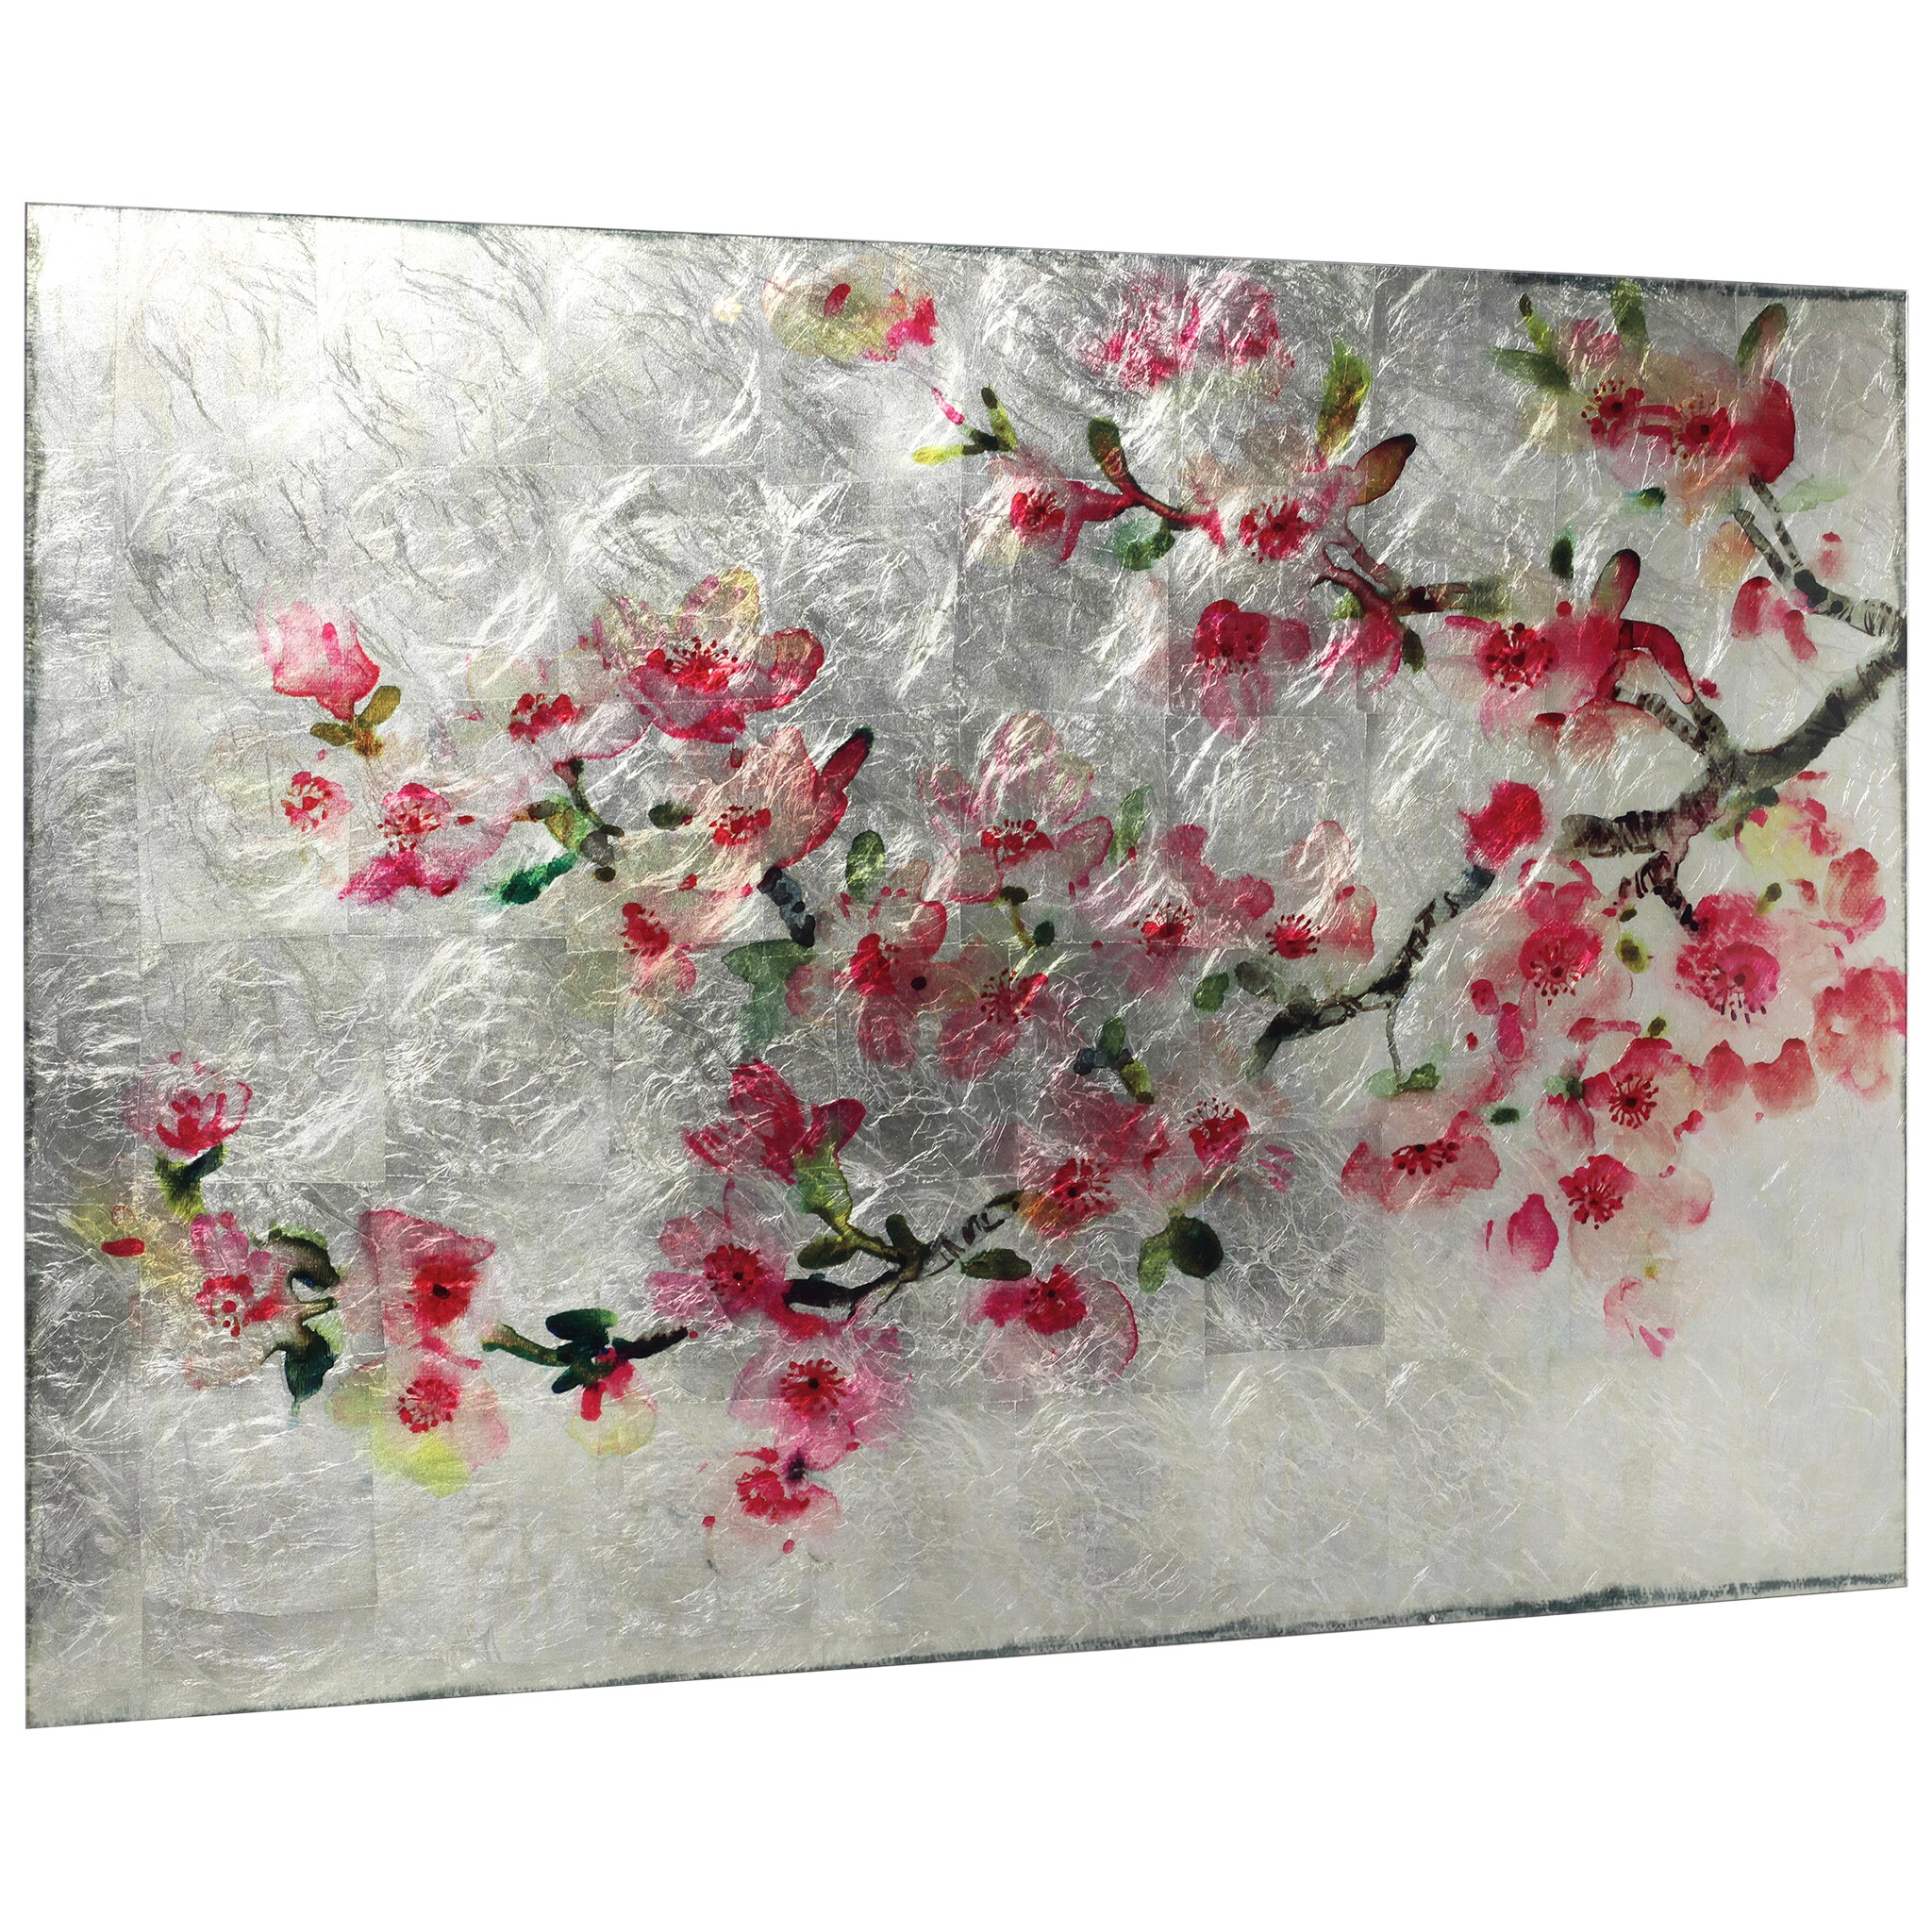 Empire Art Direct 32-in H x 48-in W Botanical Glass Print at Lowes.com